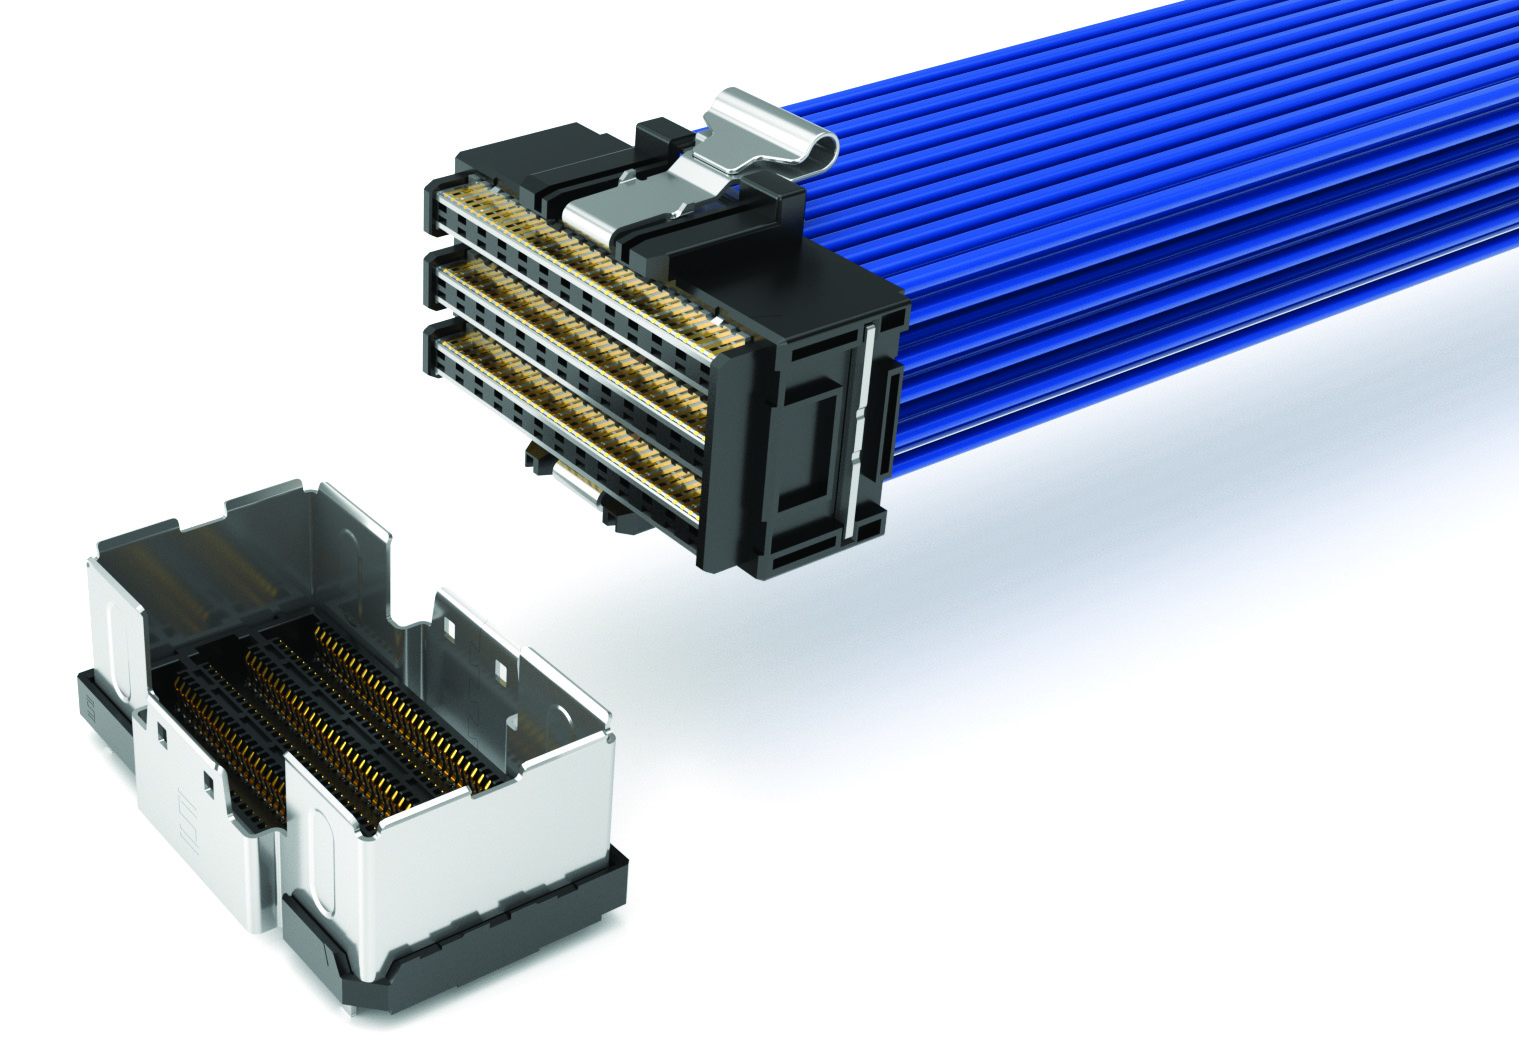 Samtec’s AcceleRate® HP cable product rated at 112 Gb/s PAM4 features ultra-low-skew twinax cable.